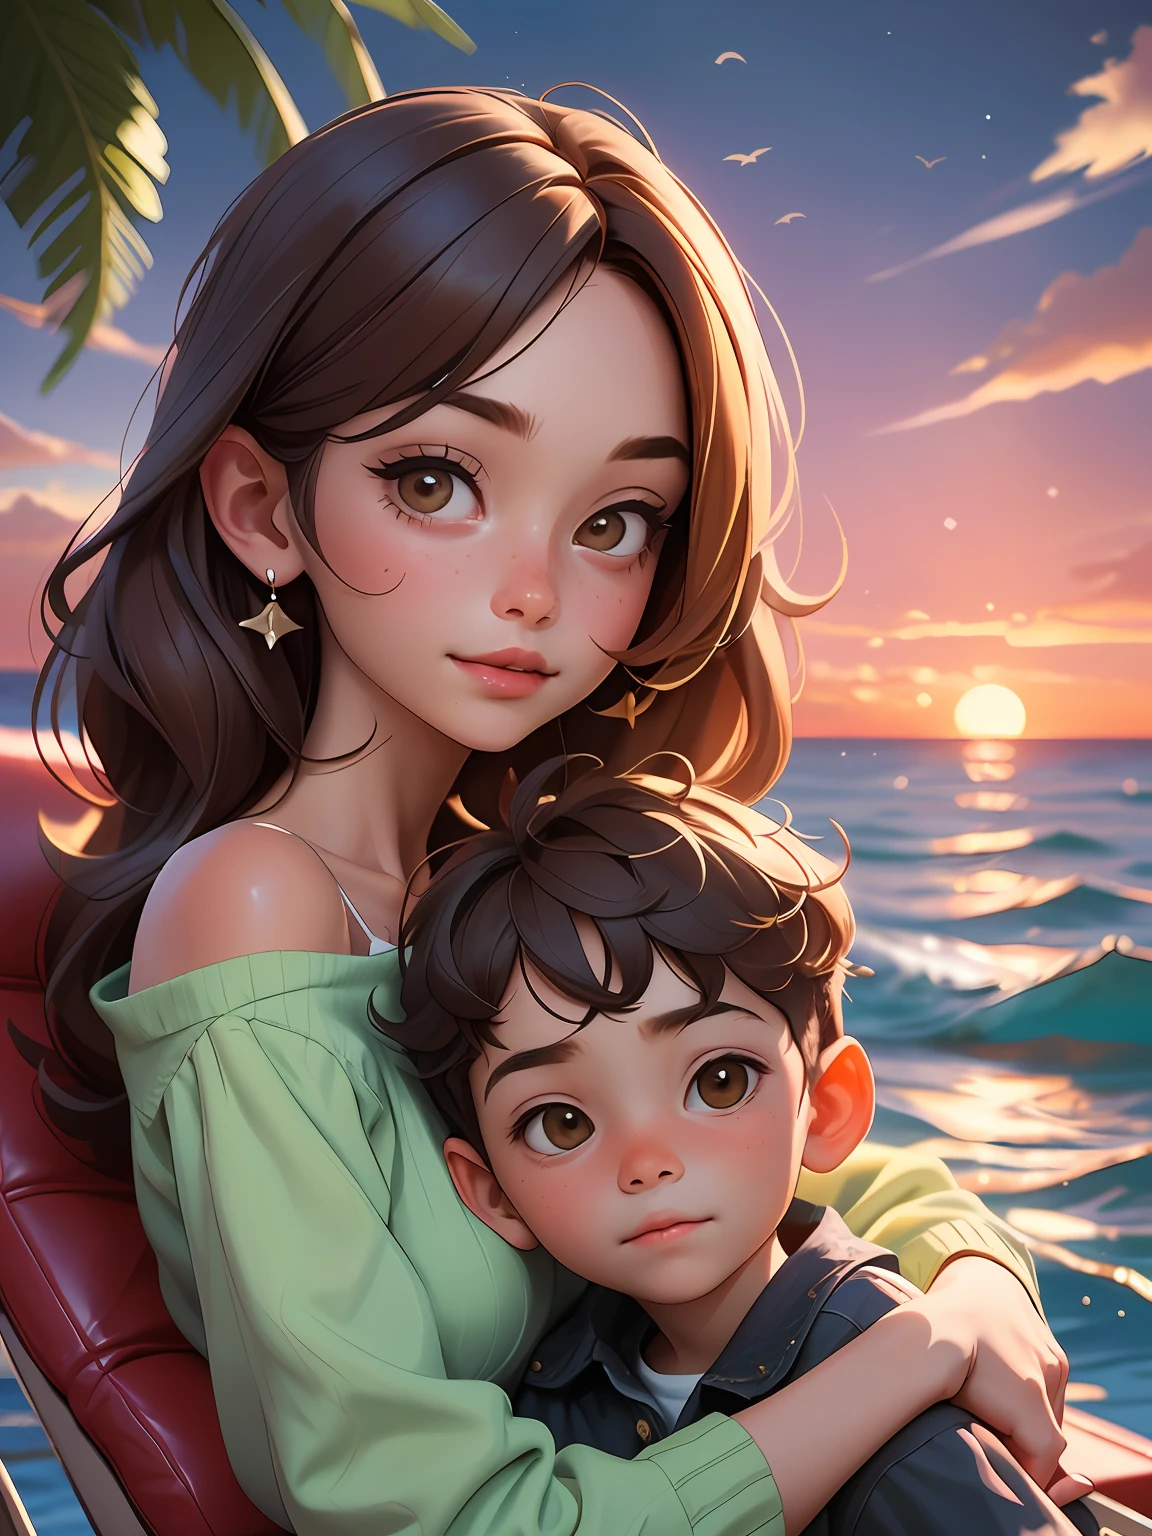 6-year-old boy with brown hair, on his mother's lap, also with brown hair and shoulder length, with the sea in the background at sunset